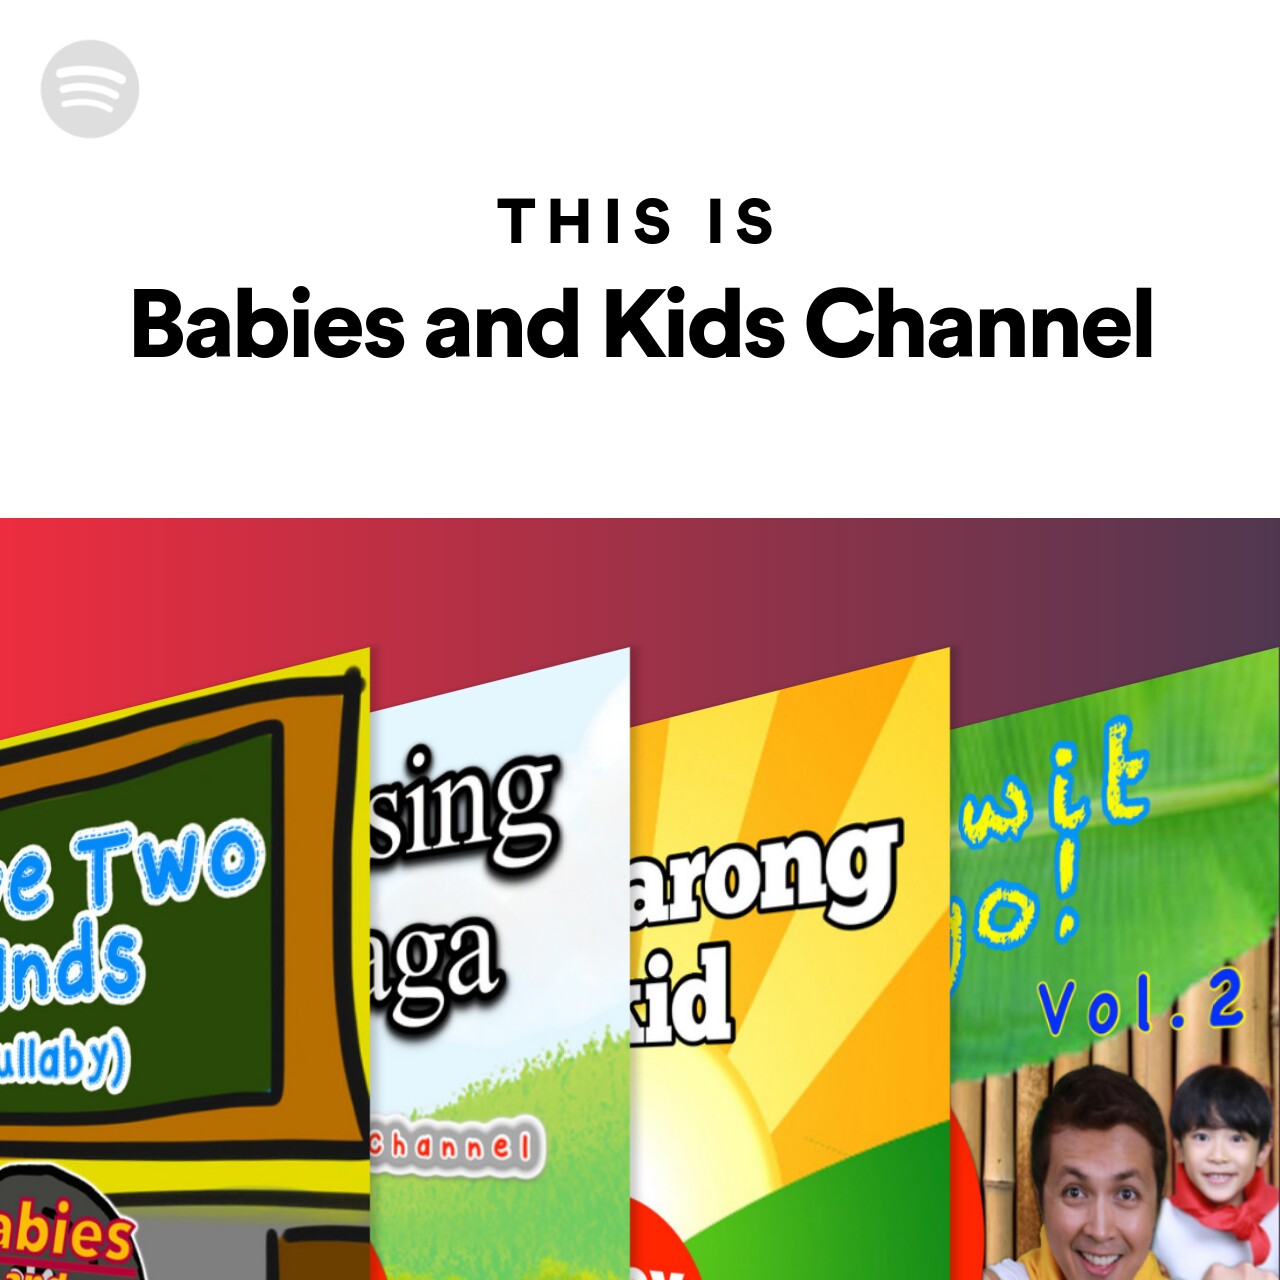 This Is Babies and Kids Channel